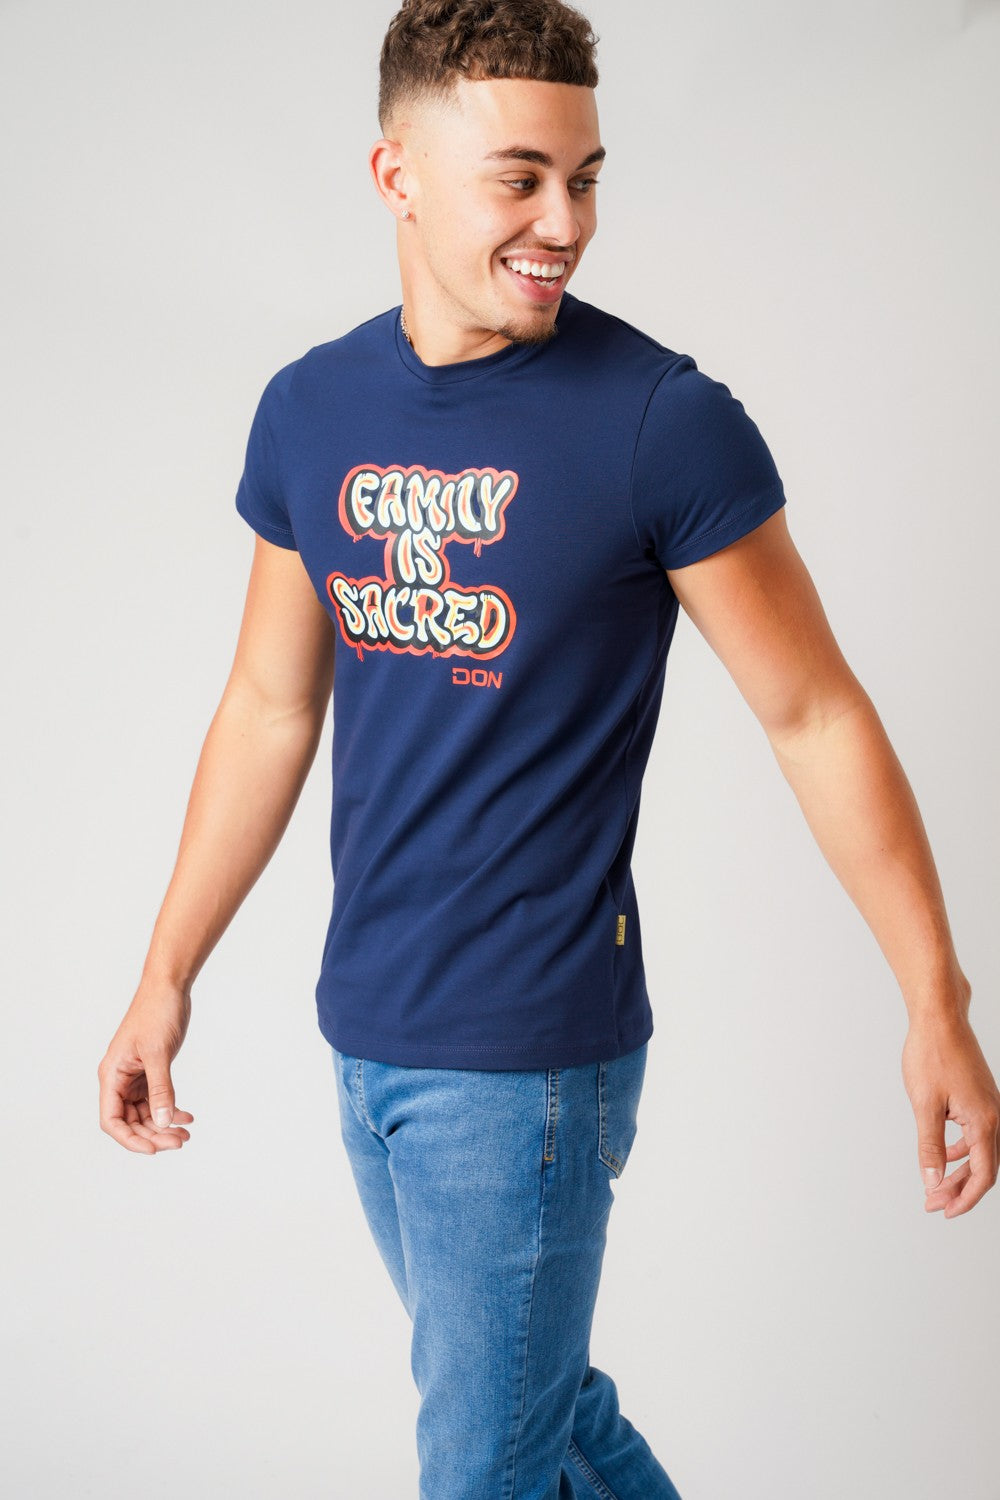 FAMILY IS SACRED NAVY T-SHIRT - Don Jeans